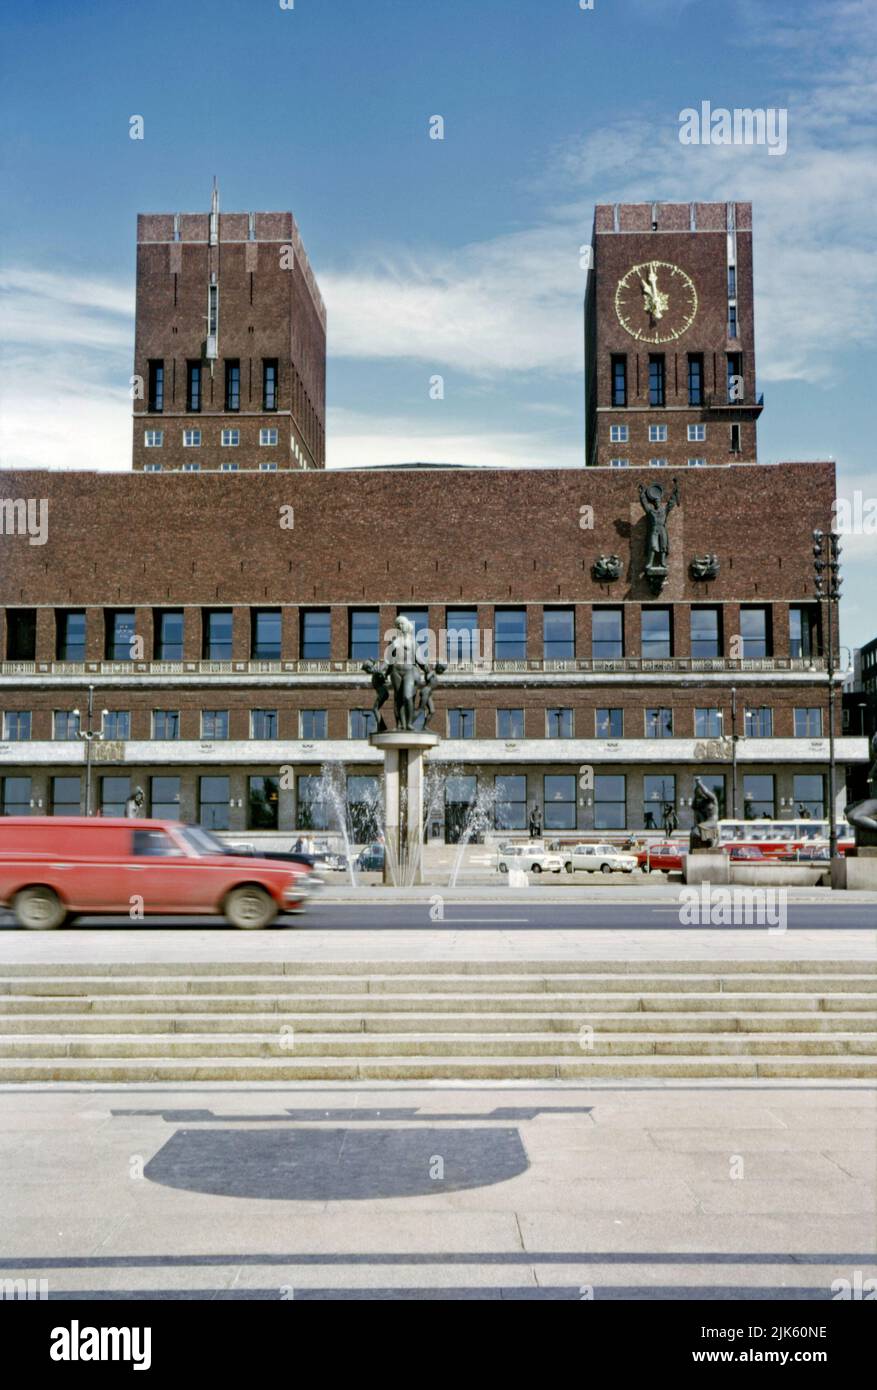 The City Hall, Oslo, Norway in 1970. This modern, imposing red brick building is on the waterfront in the Pipervika district of the capital city. Designed by Arnstein Arneberg and Magnus Poulsson, work started in 1931 but progress was halted by the outbreak of World War II.  It was finally inaugurated in 1950. The administrative seat of the City Council houses important murals and artworks from celebrated Norwegian painters and sculptors. Here, within its walls, the prestigious Nobel Peace Prize ceremony is held. This image is from an amateur 35mm colour transparency – a vintage 1970s photo. Stock Photo